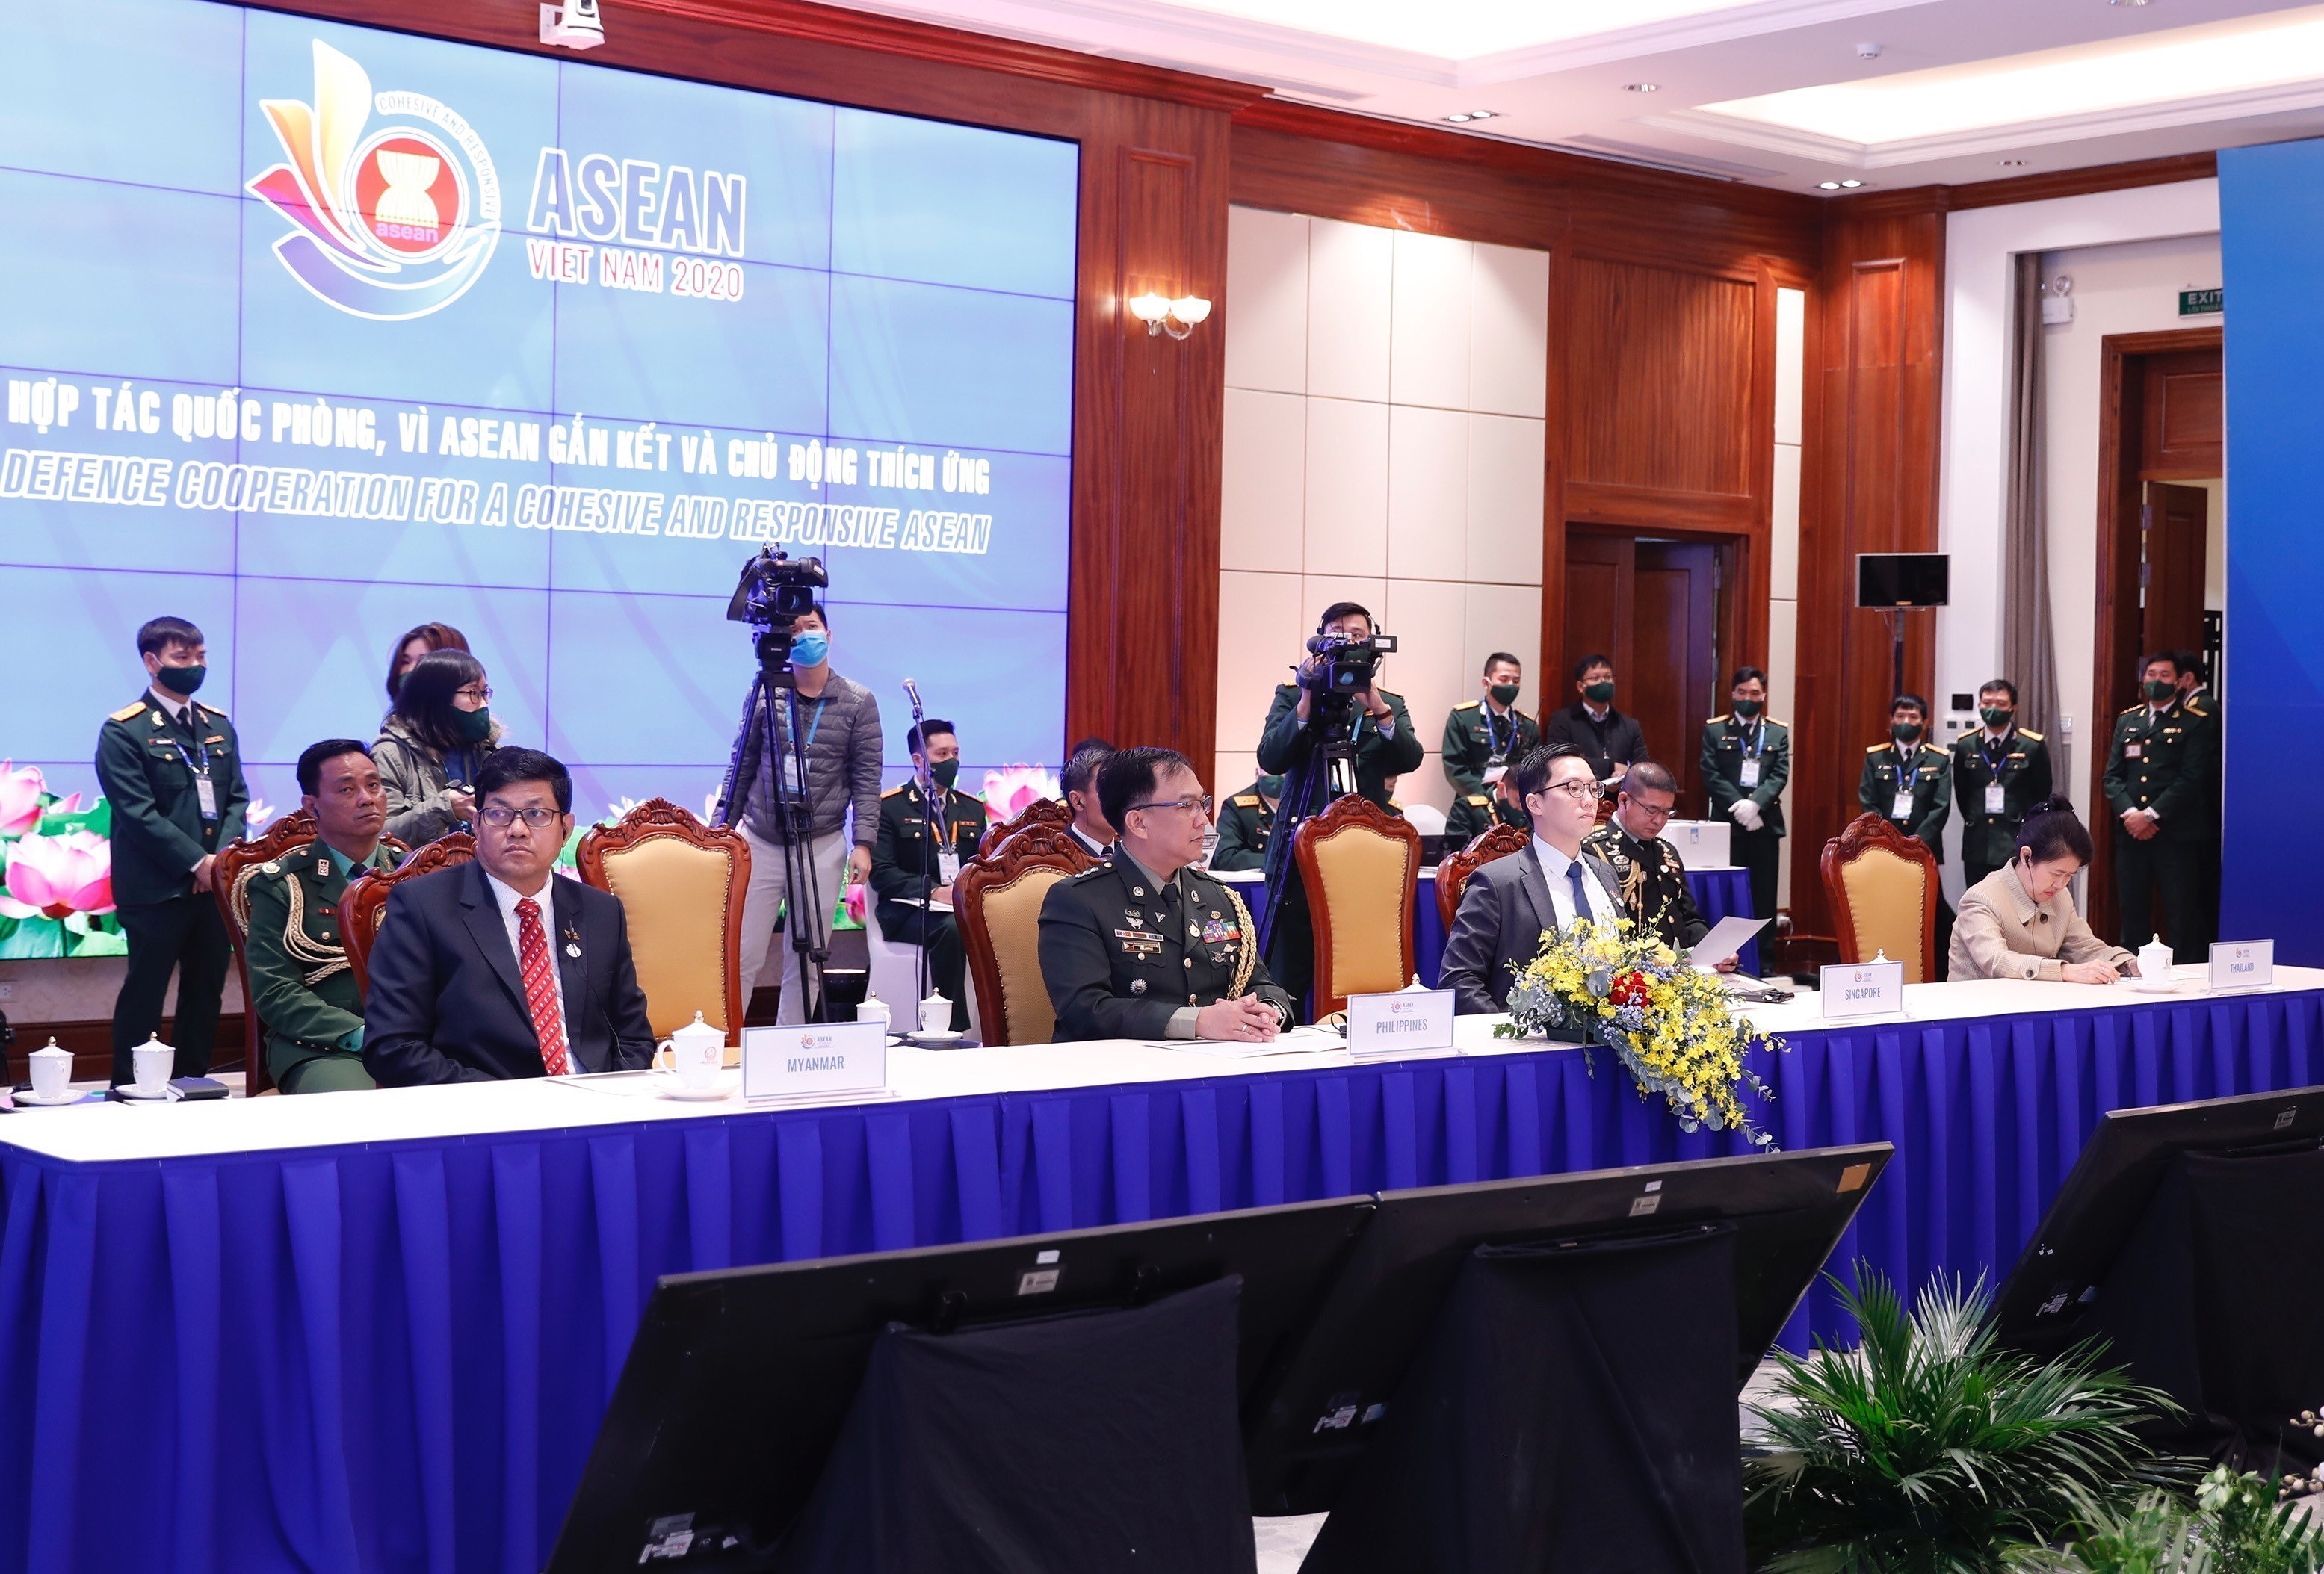 ASEAN 2020: 14th ASEAN Defence Ministers' Meeting hinh anh 3